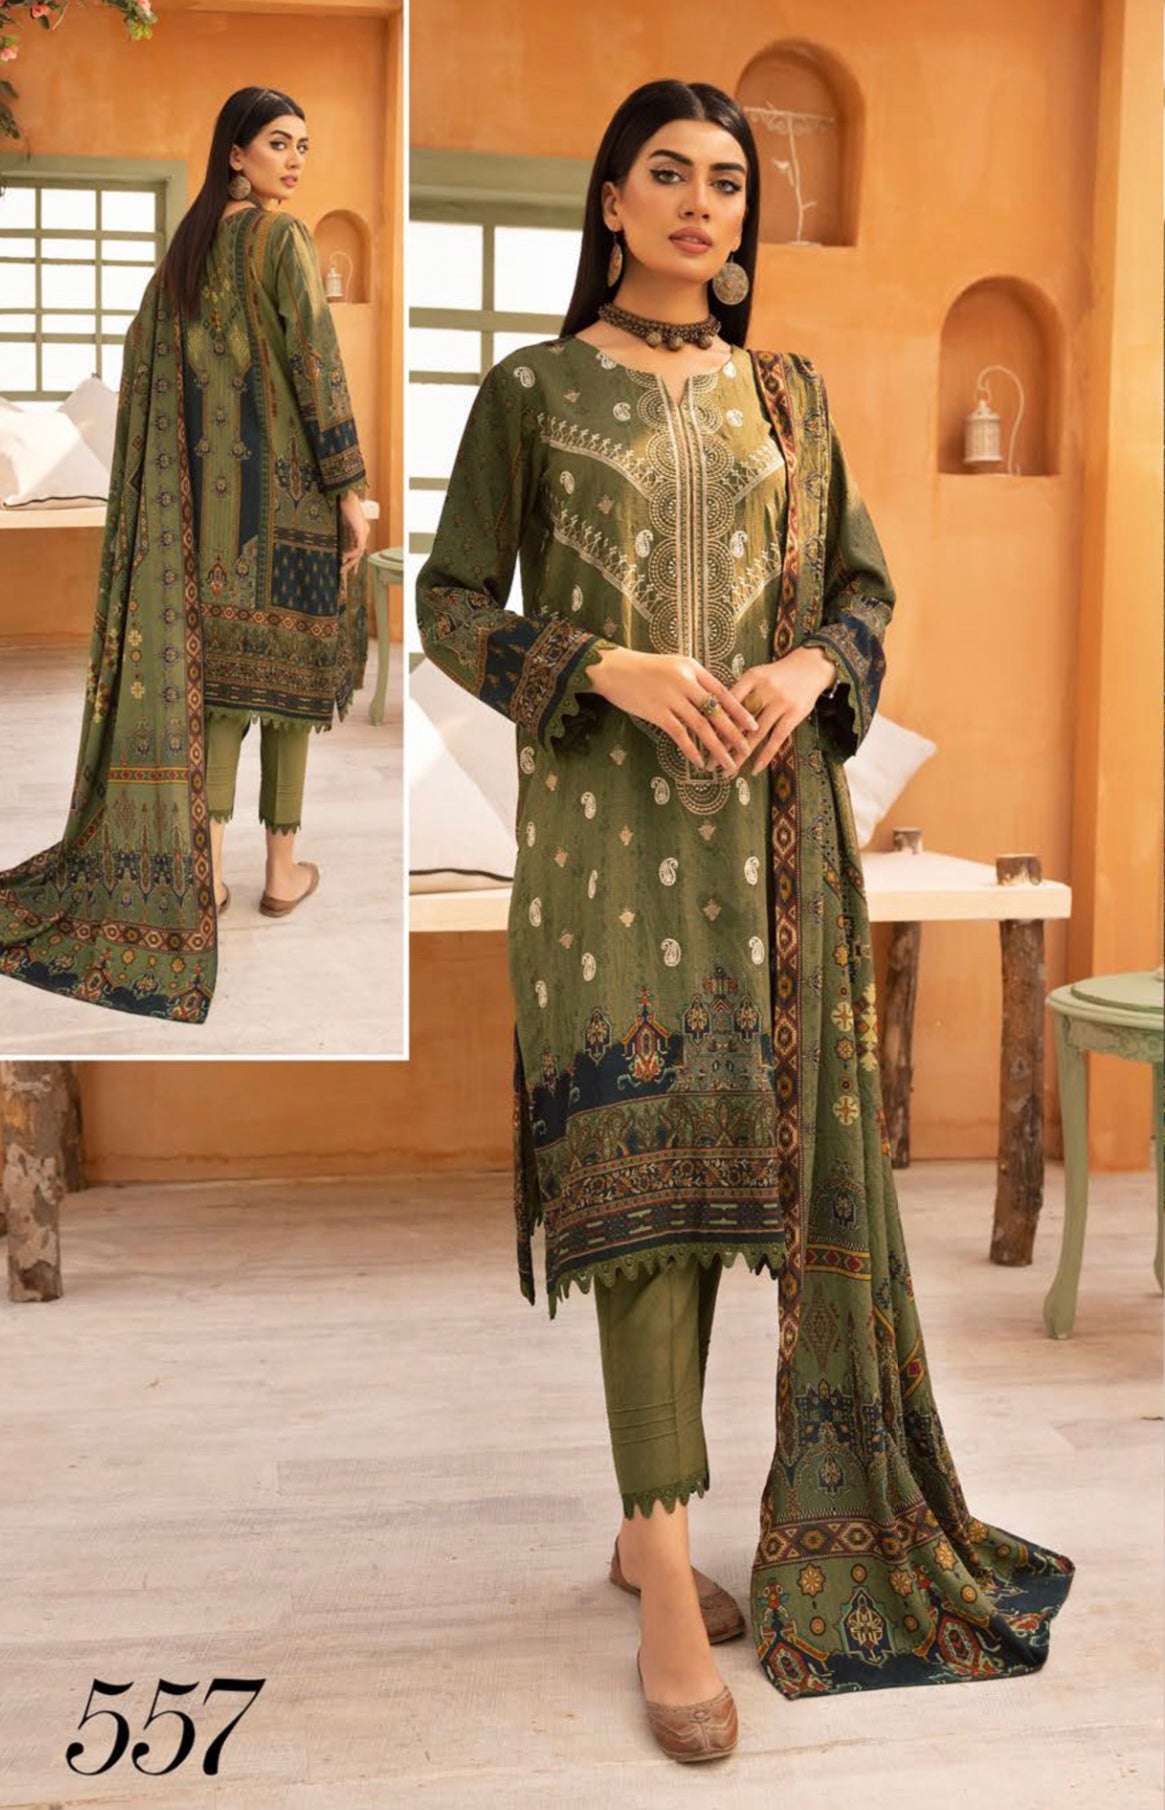 SIMRANS ‘CARNATION’ | EMBROIDERED DHANAK 3 PC READYMADE |SM555